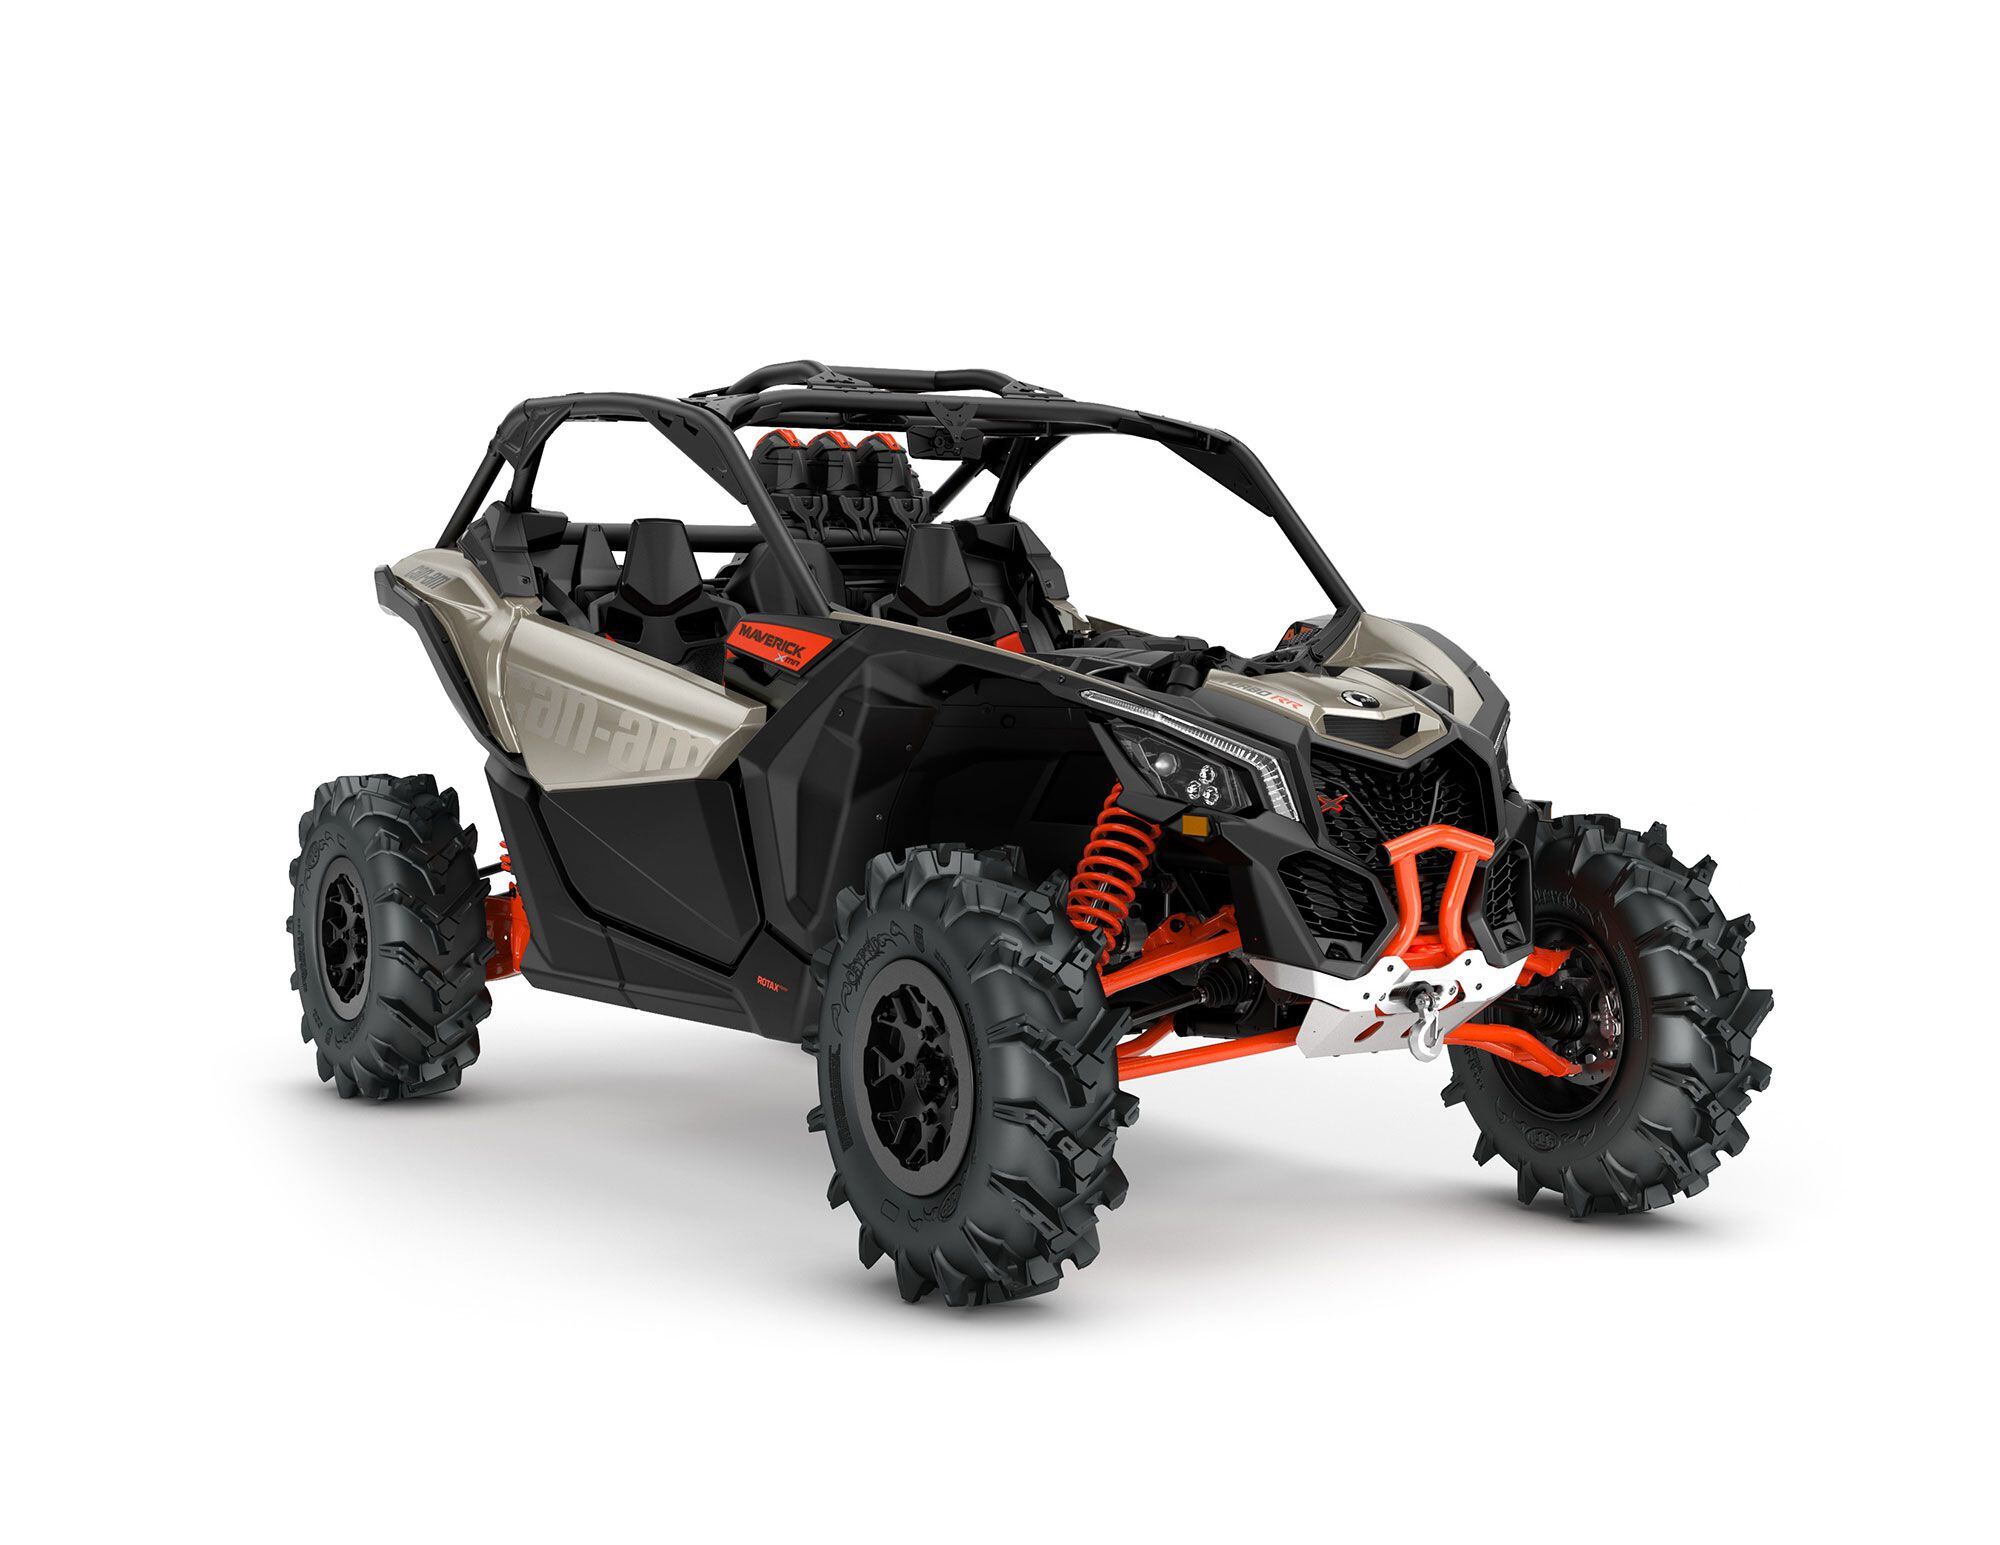 2022 Can-Am Maverick X3 X MR Turbo RR 64 front view in Liquid Titanium and Magma Red.